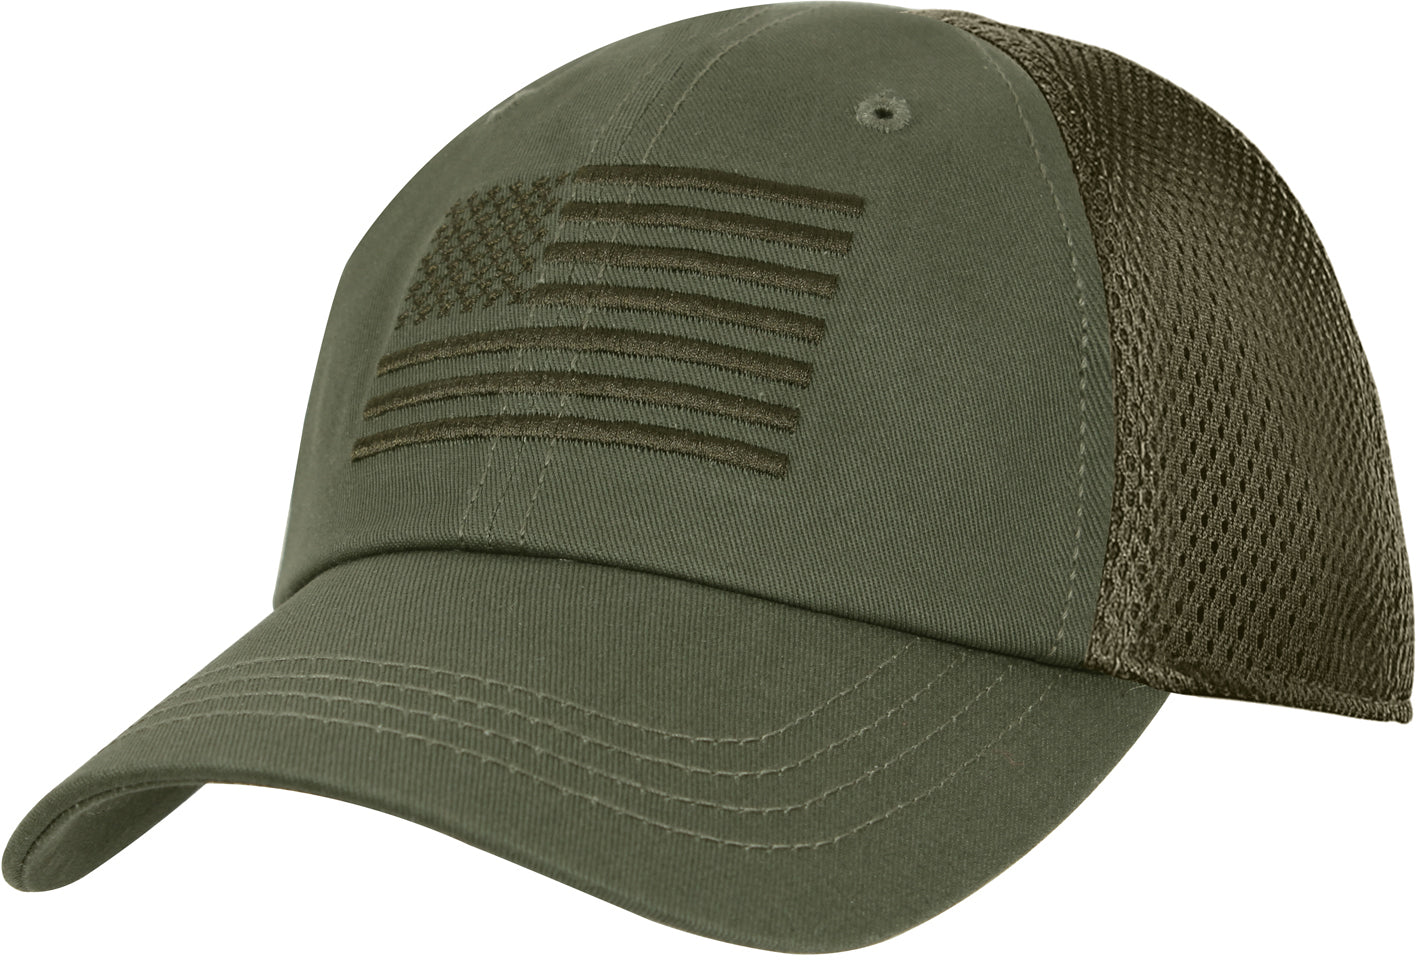 Olive Drab - Tactical Mesh Back Cap With Embroidered US Flag